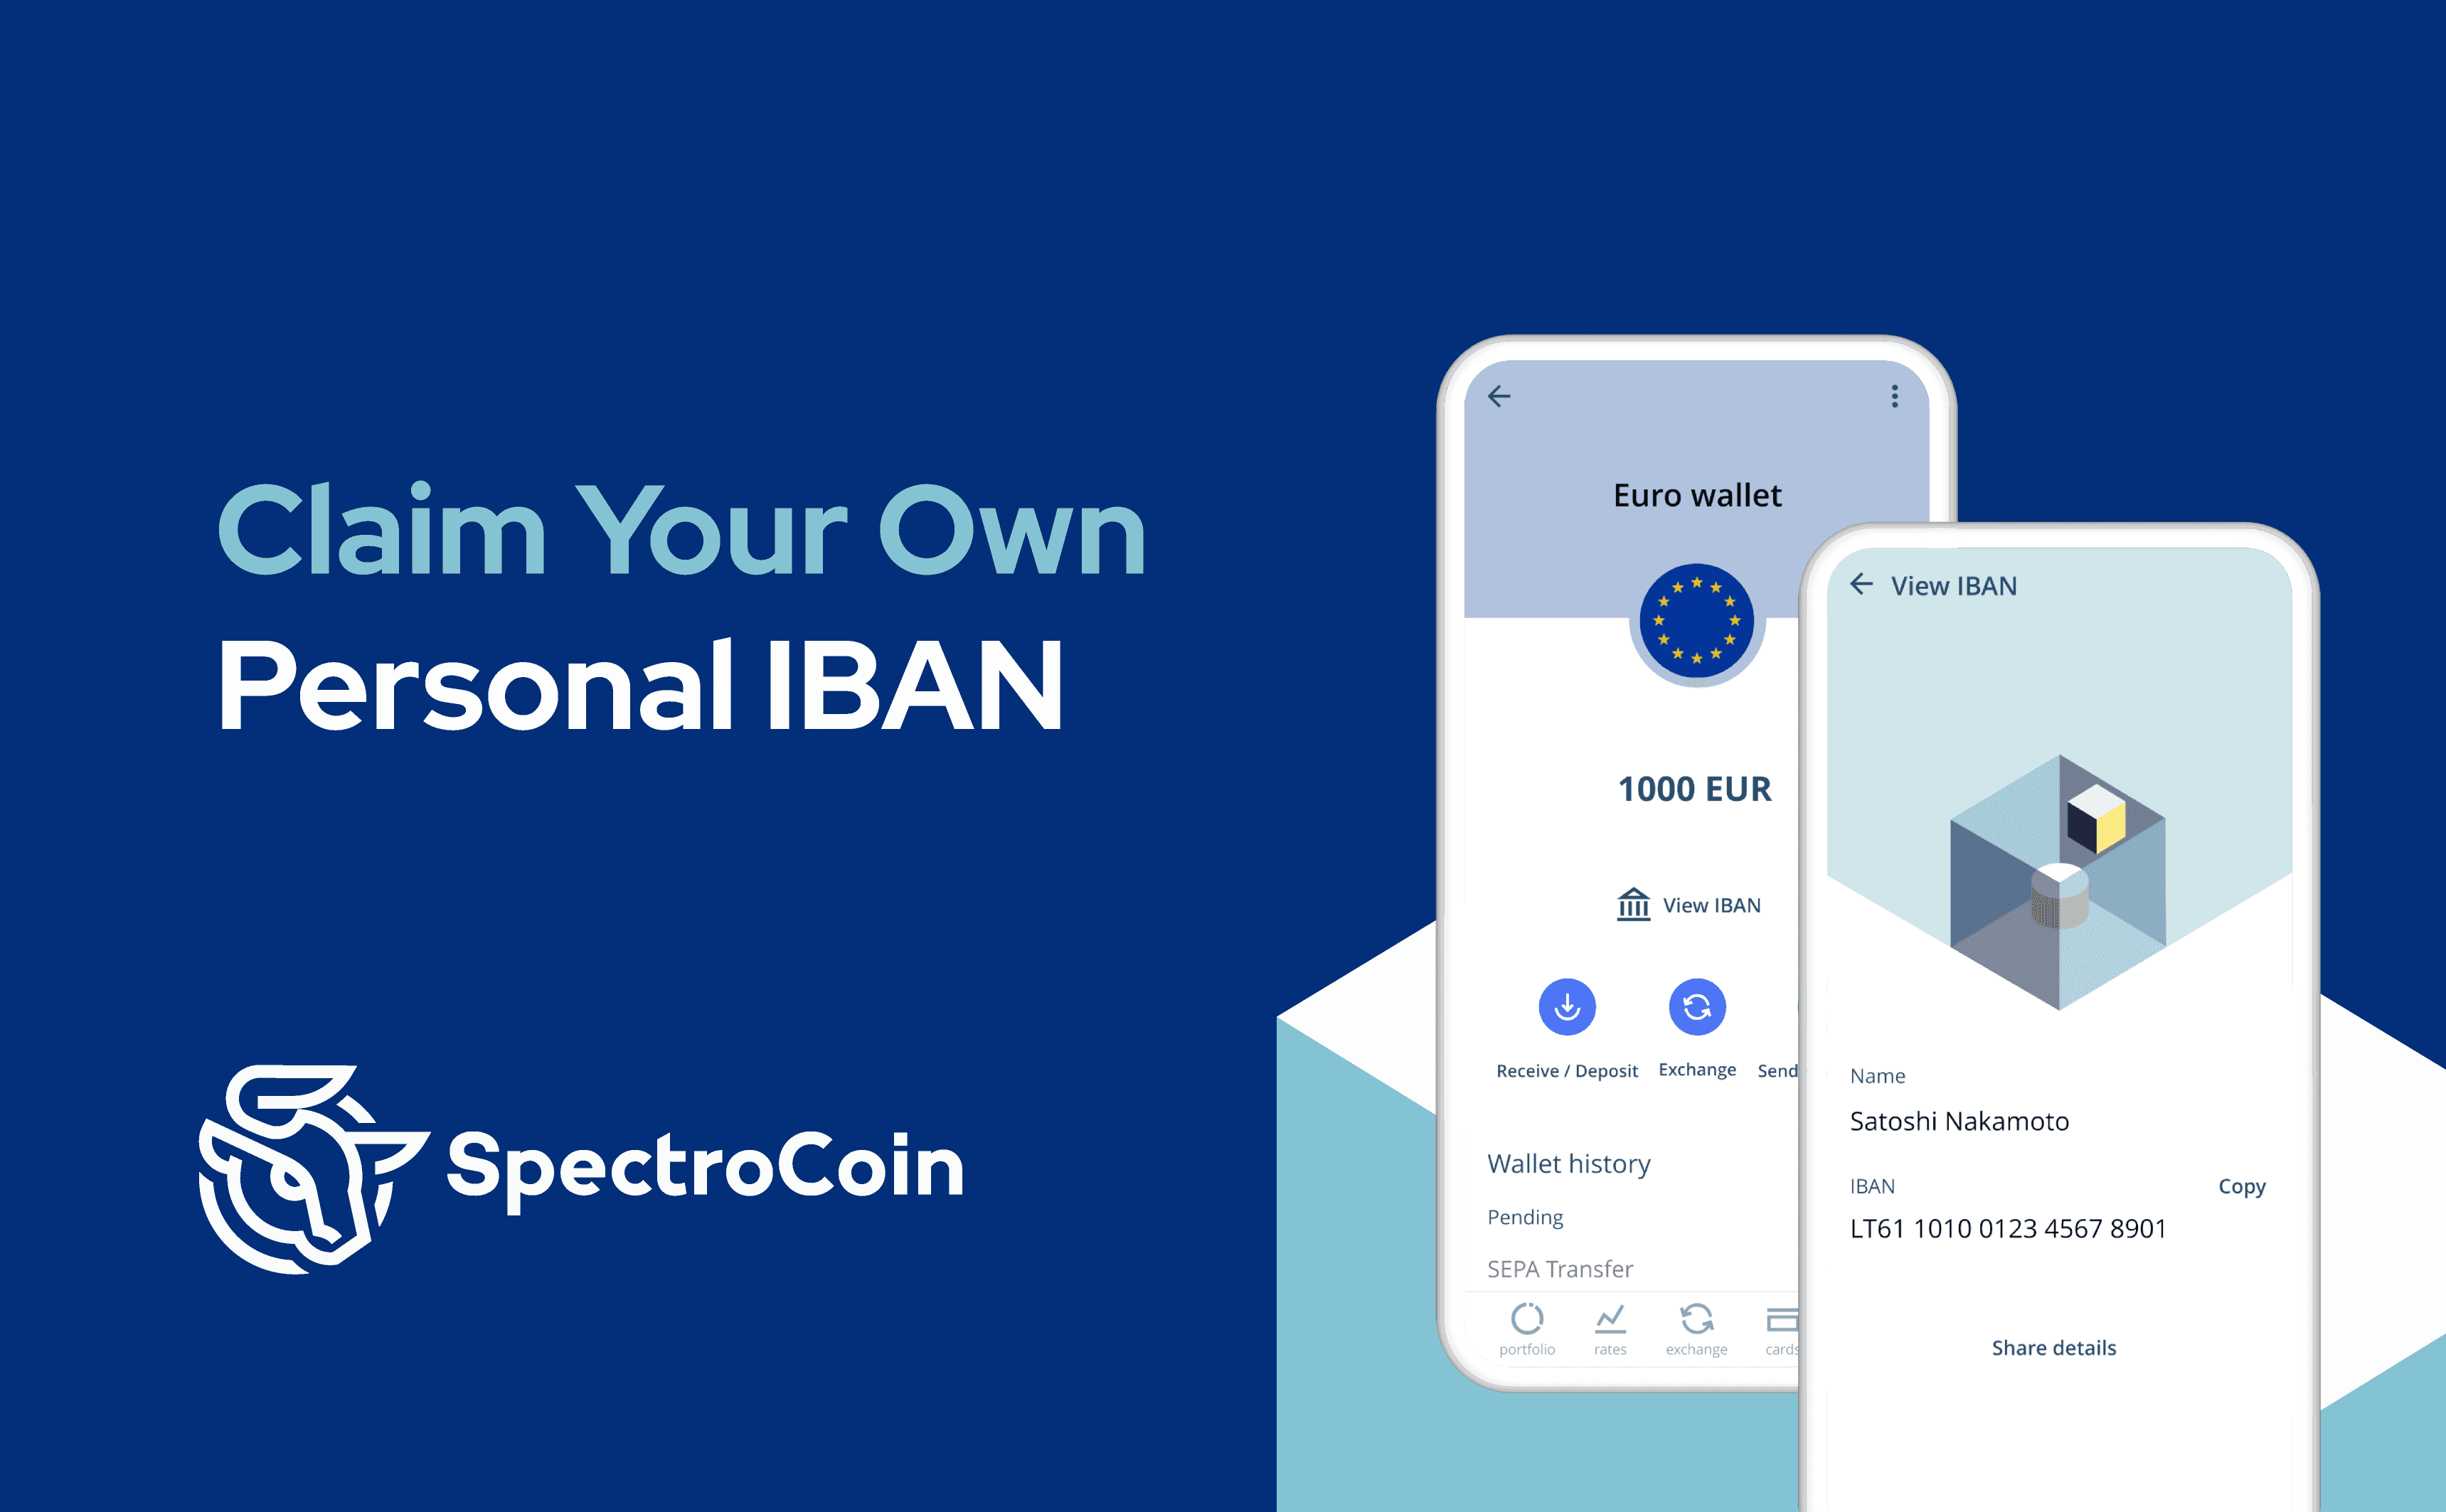 From now on, users can claim their own IBAN account at SpectroCoin.